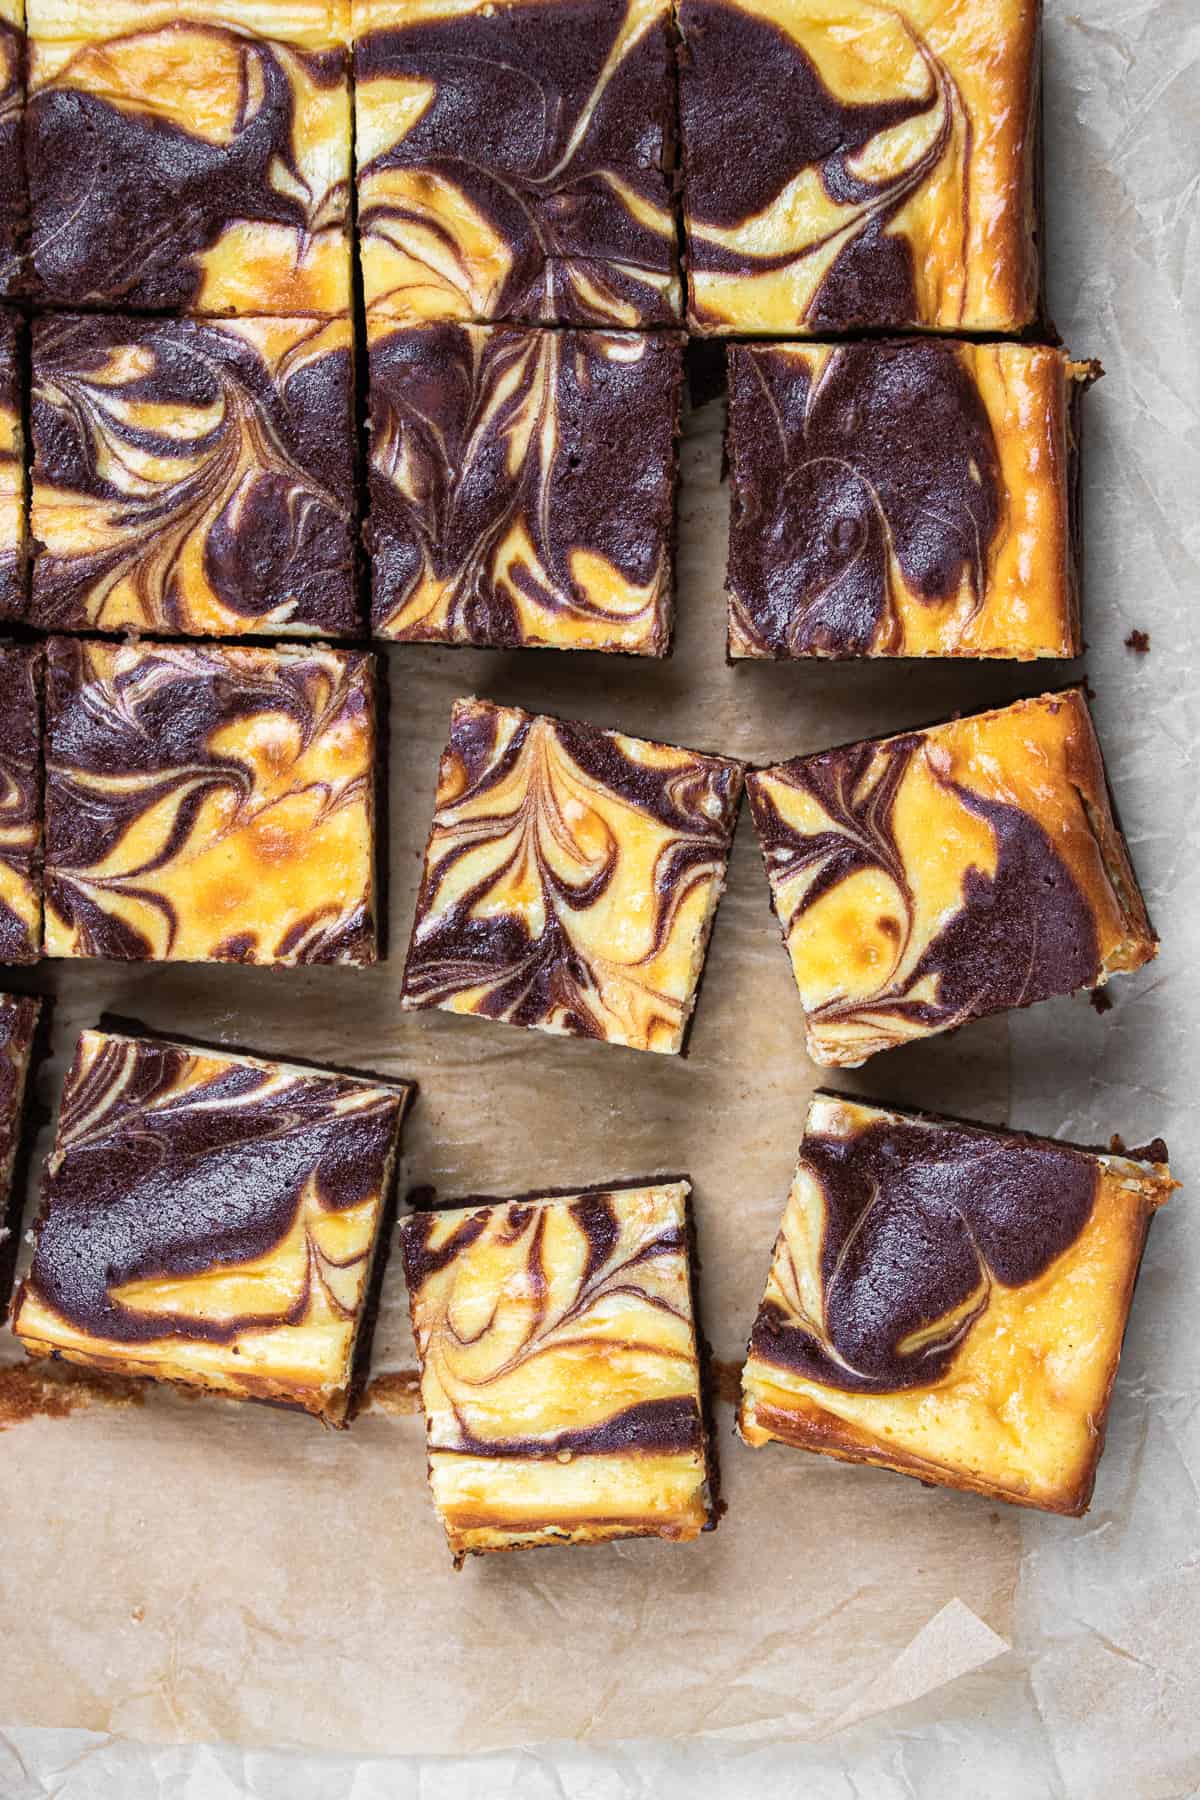 Cheesecake brownies, cut in small squares, laying on a parchment paper.